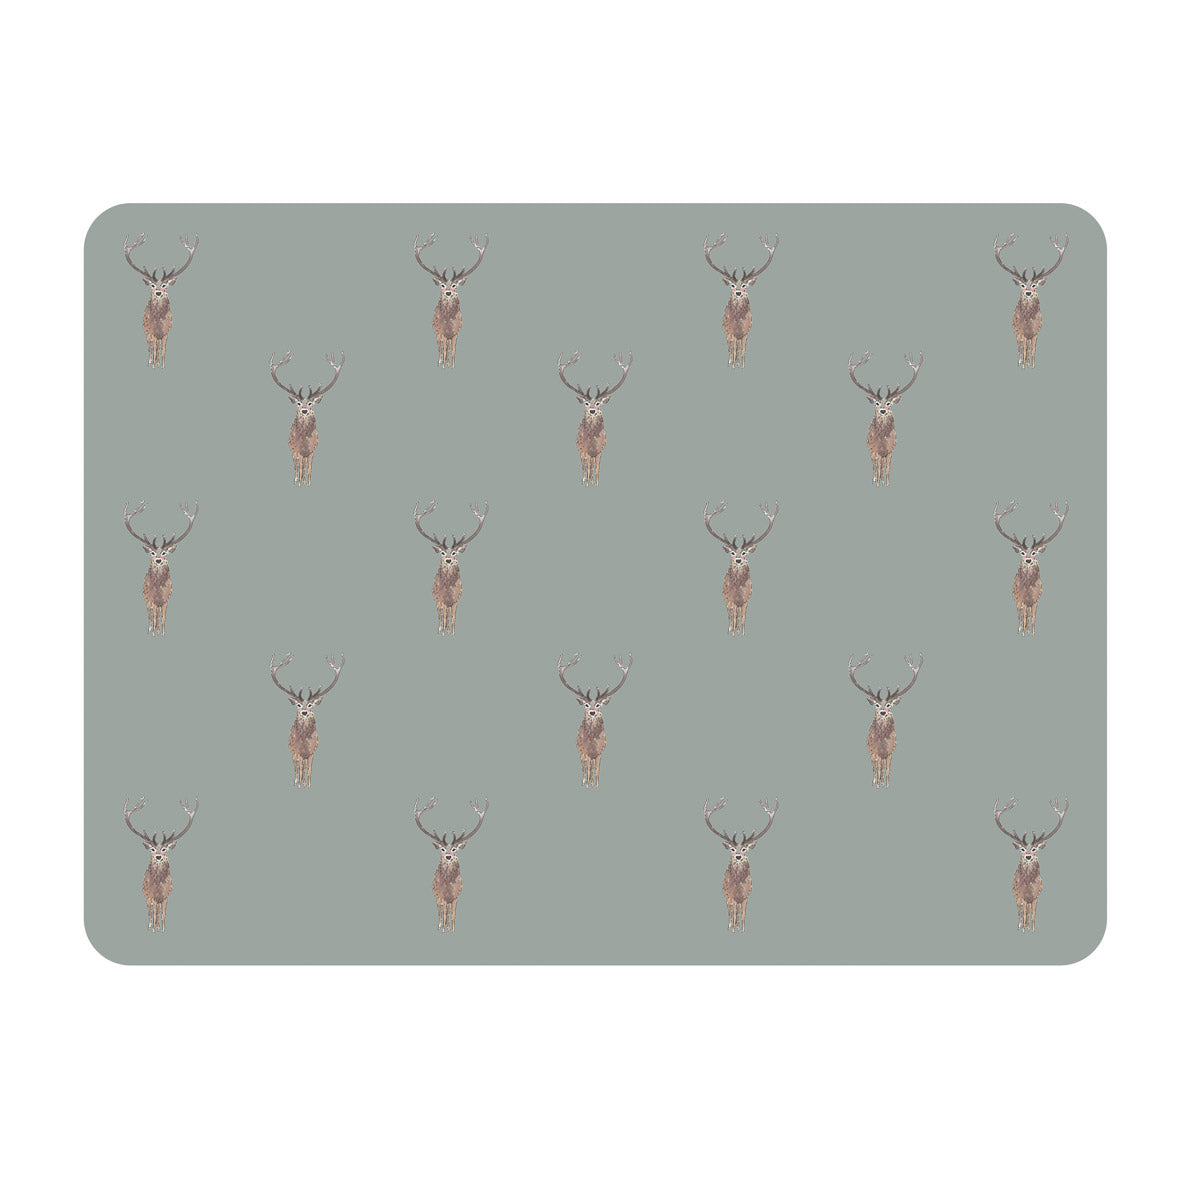 Highland Stag Placemats